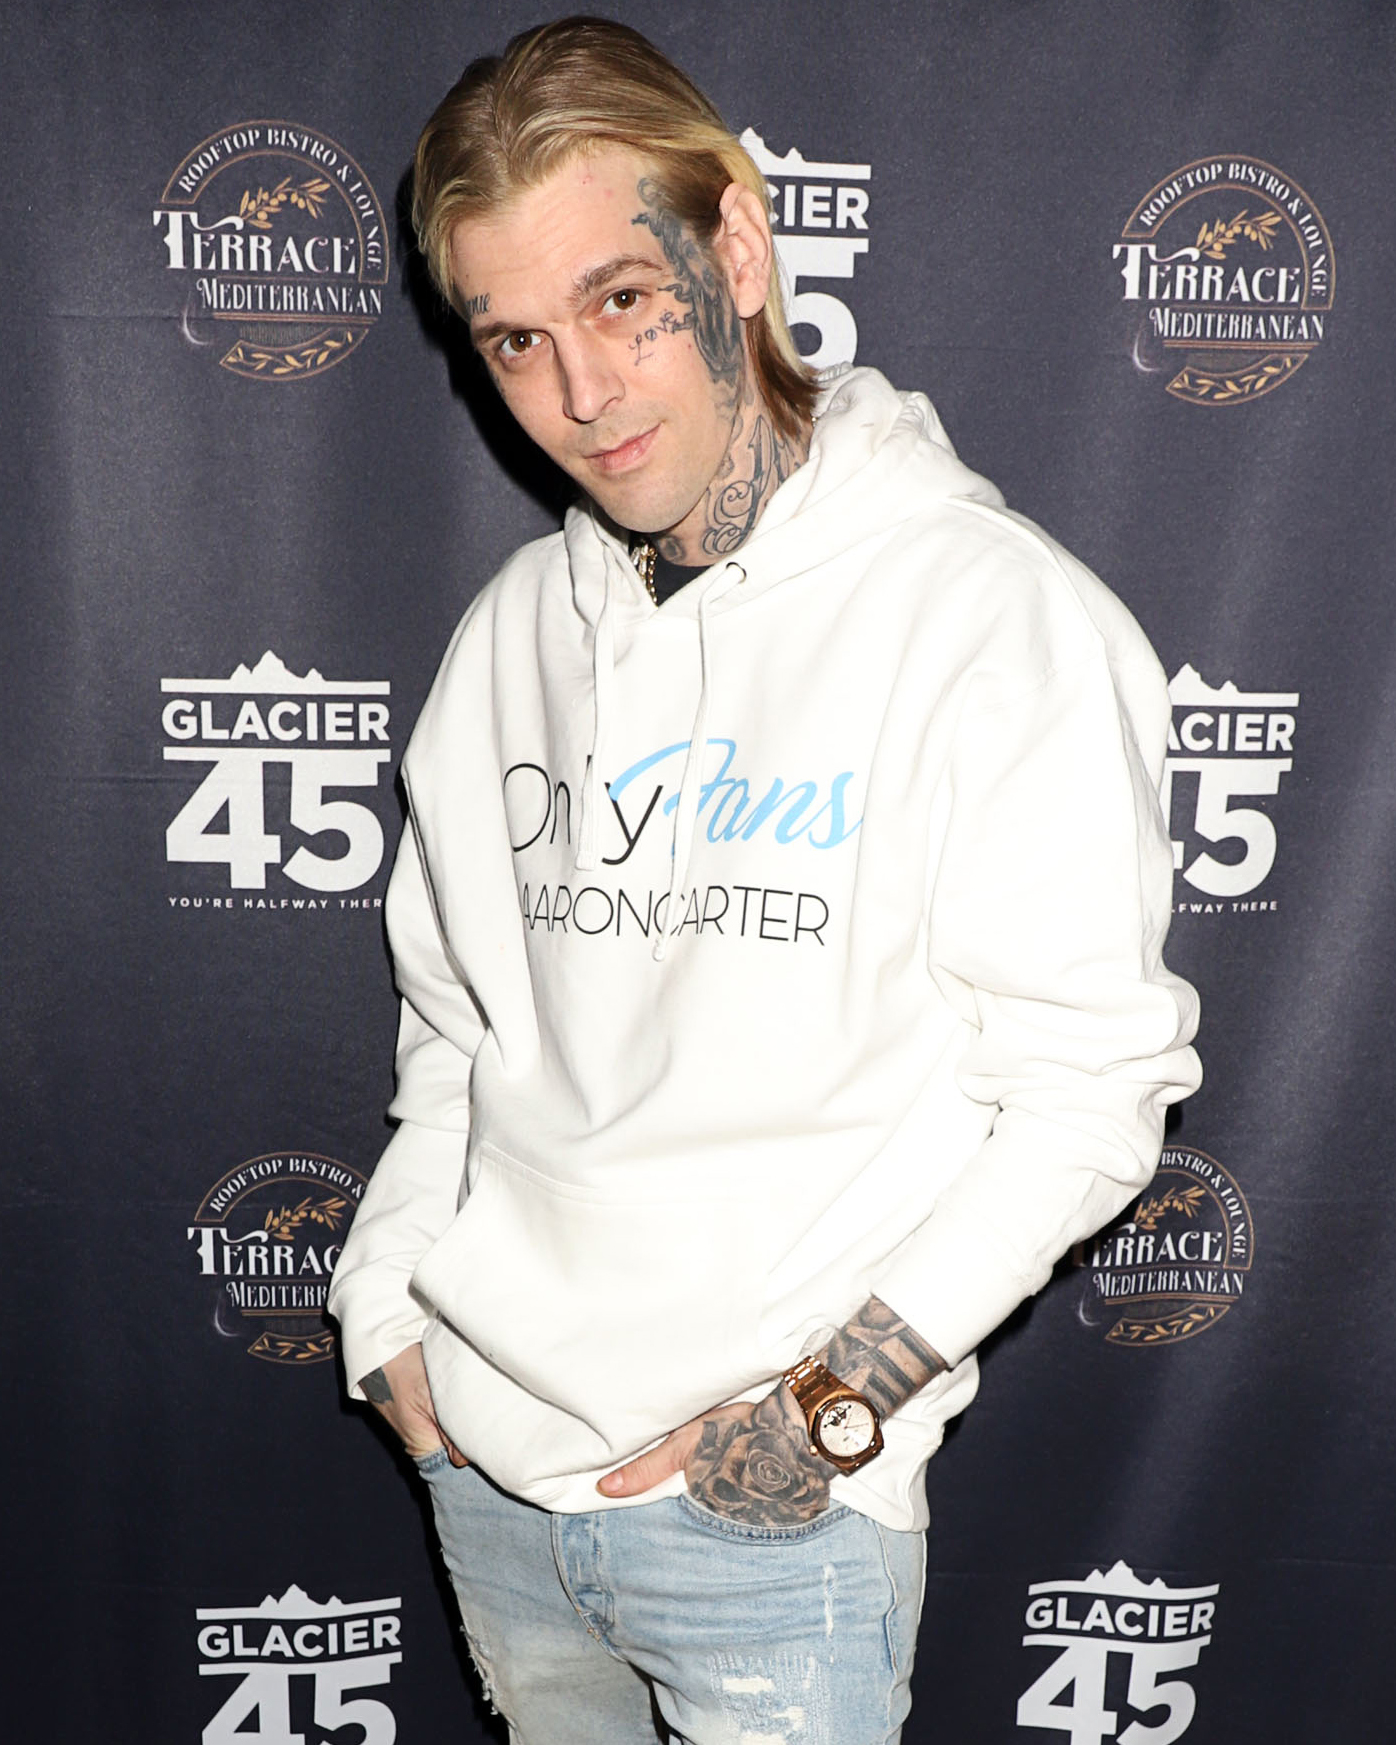 Aaron Carter Dead at 34: Reports